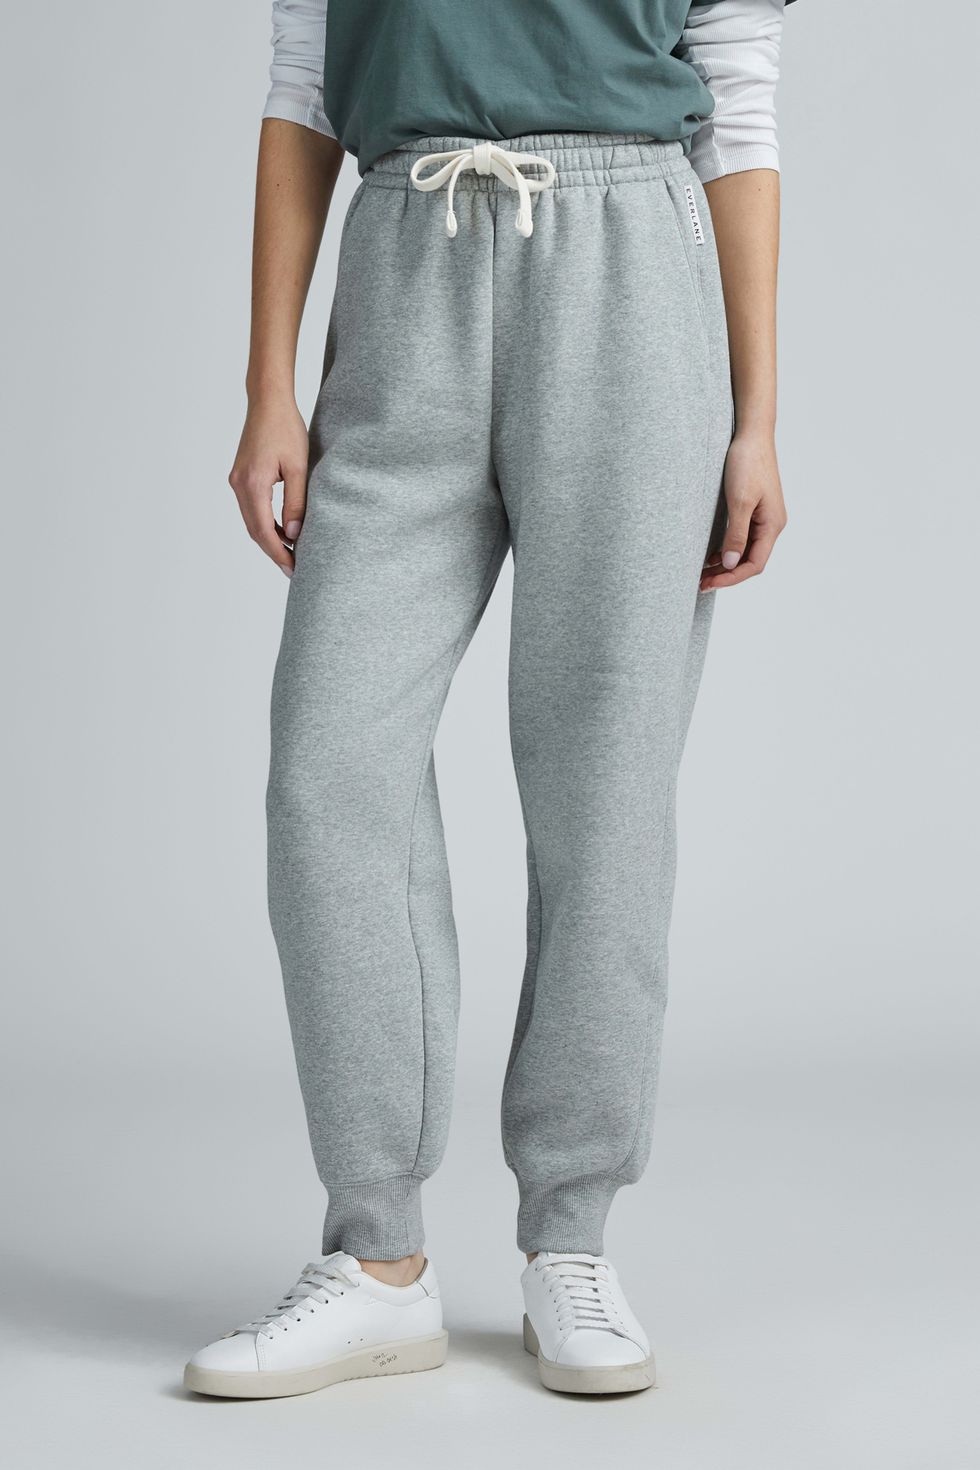 The Most Comfortable Cozy Sweatpants by Lazypants